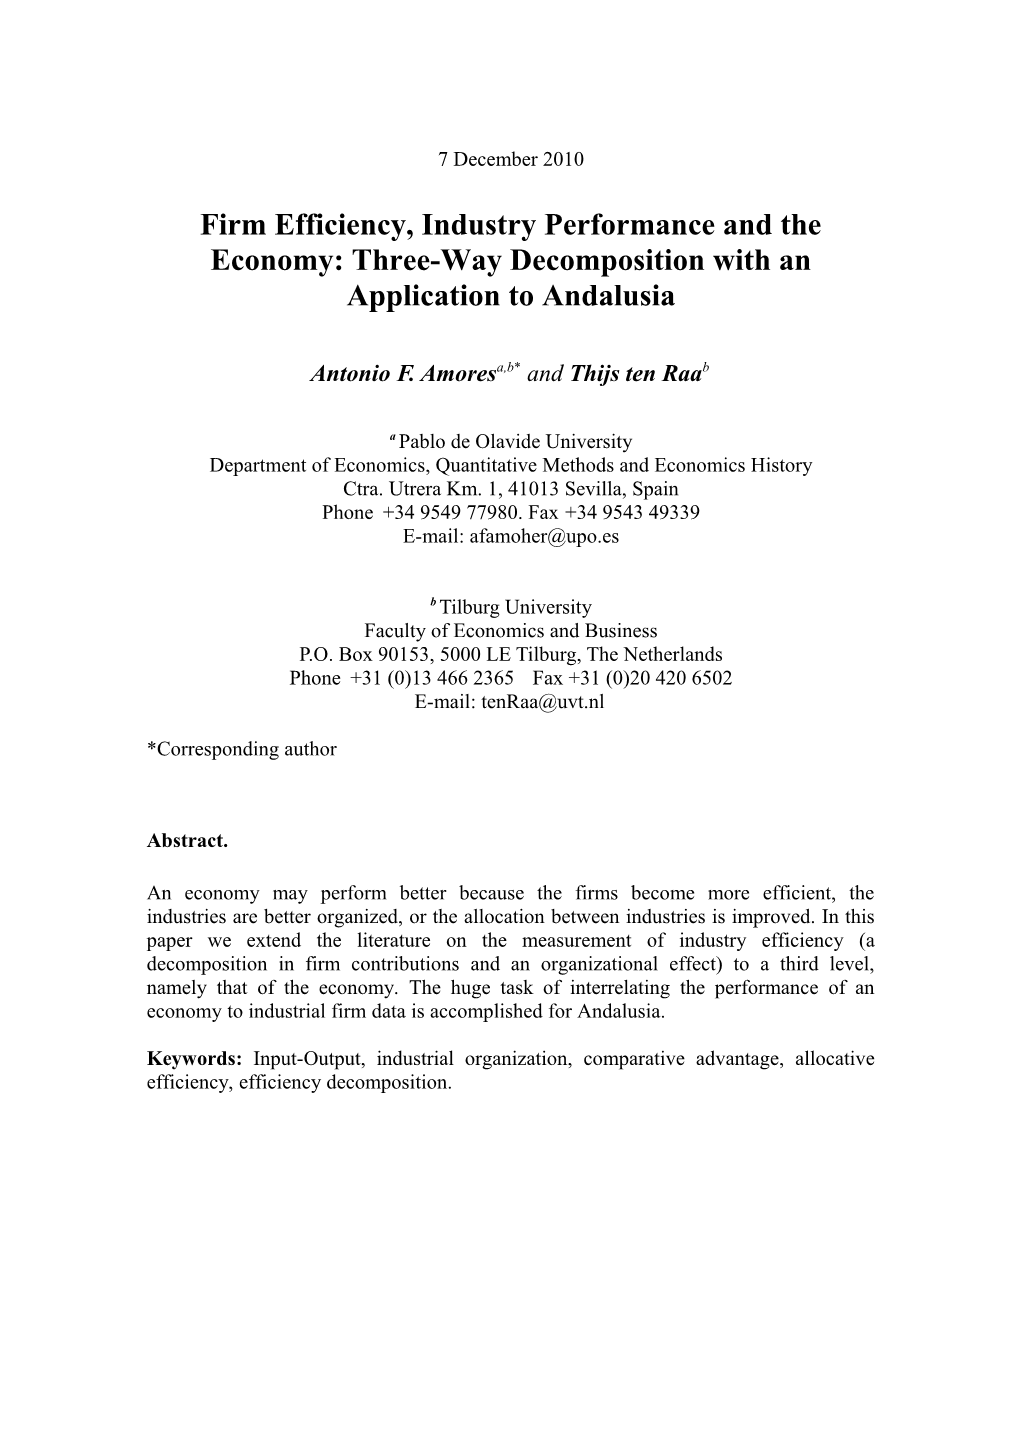 Three Way Decomposition of the Efficiency of Andalusian Economy